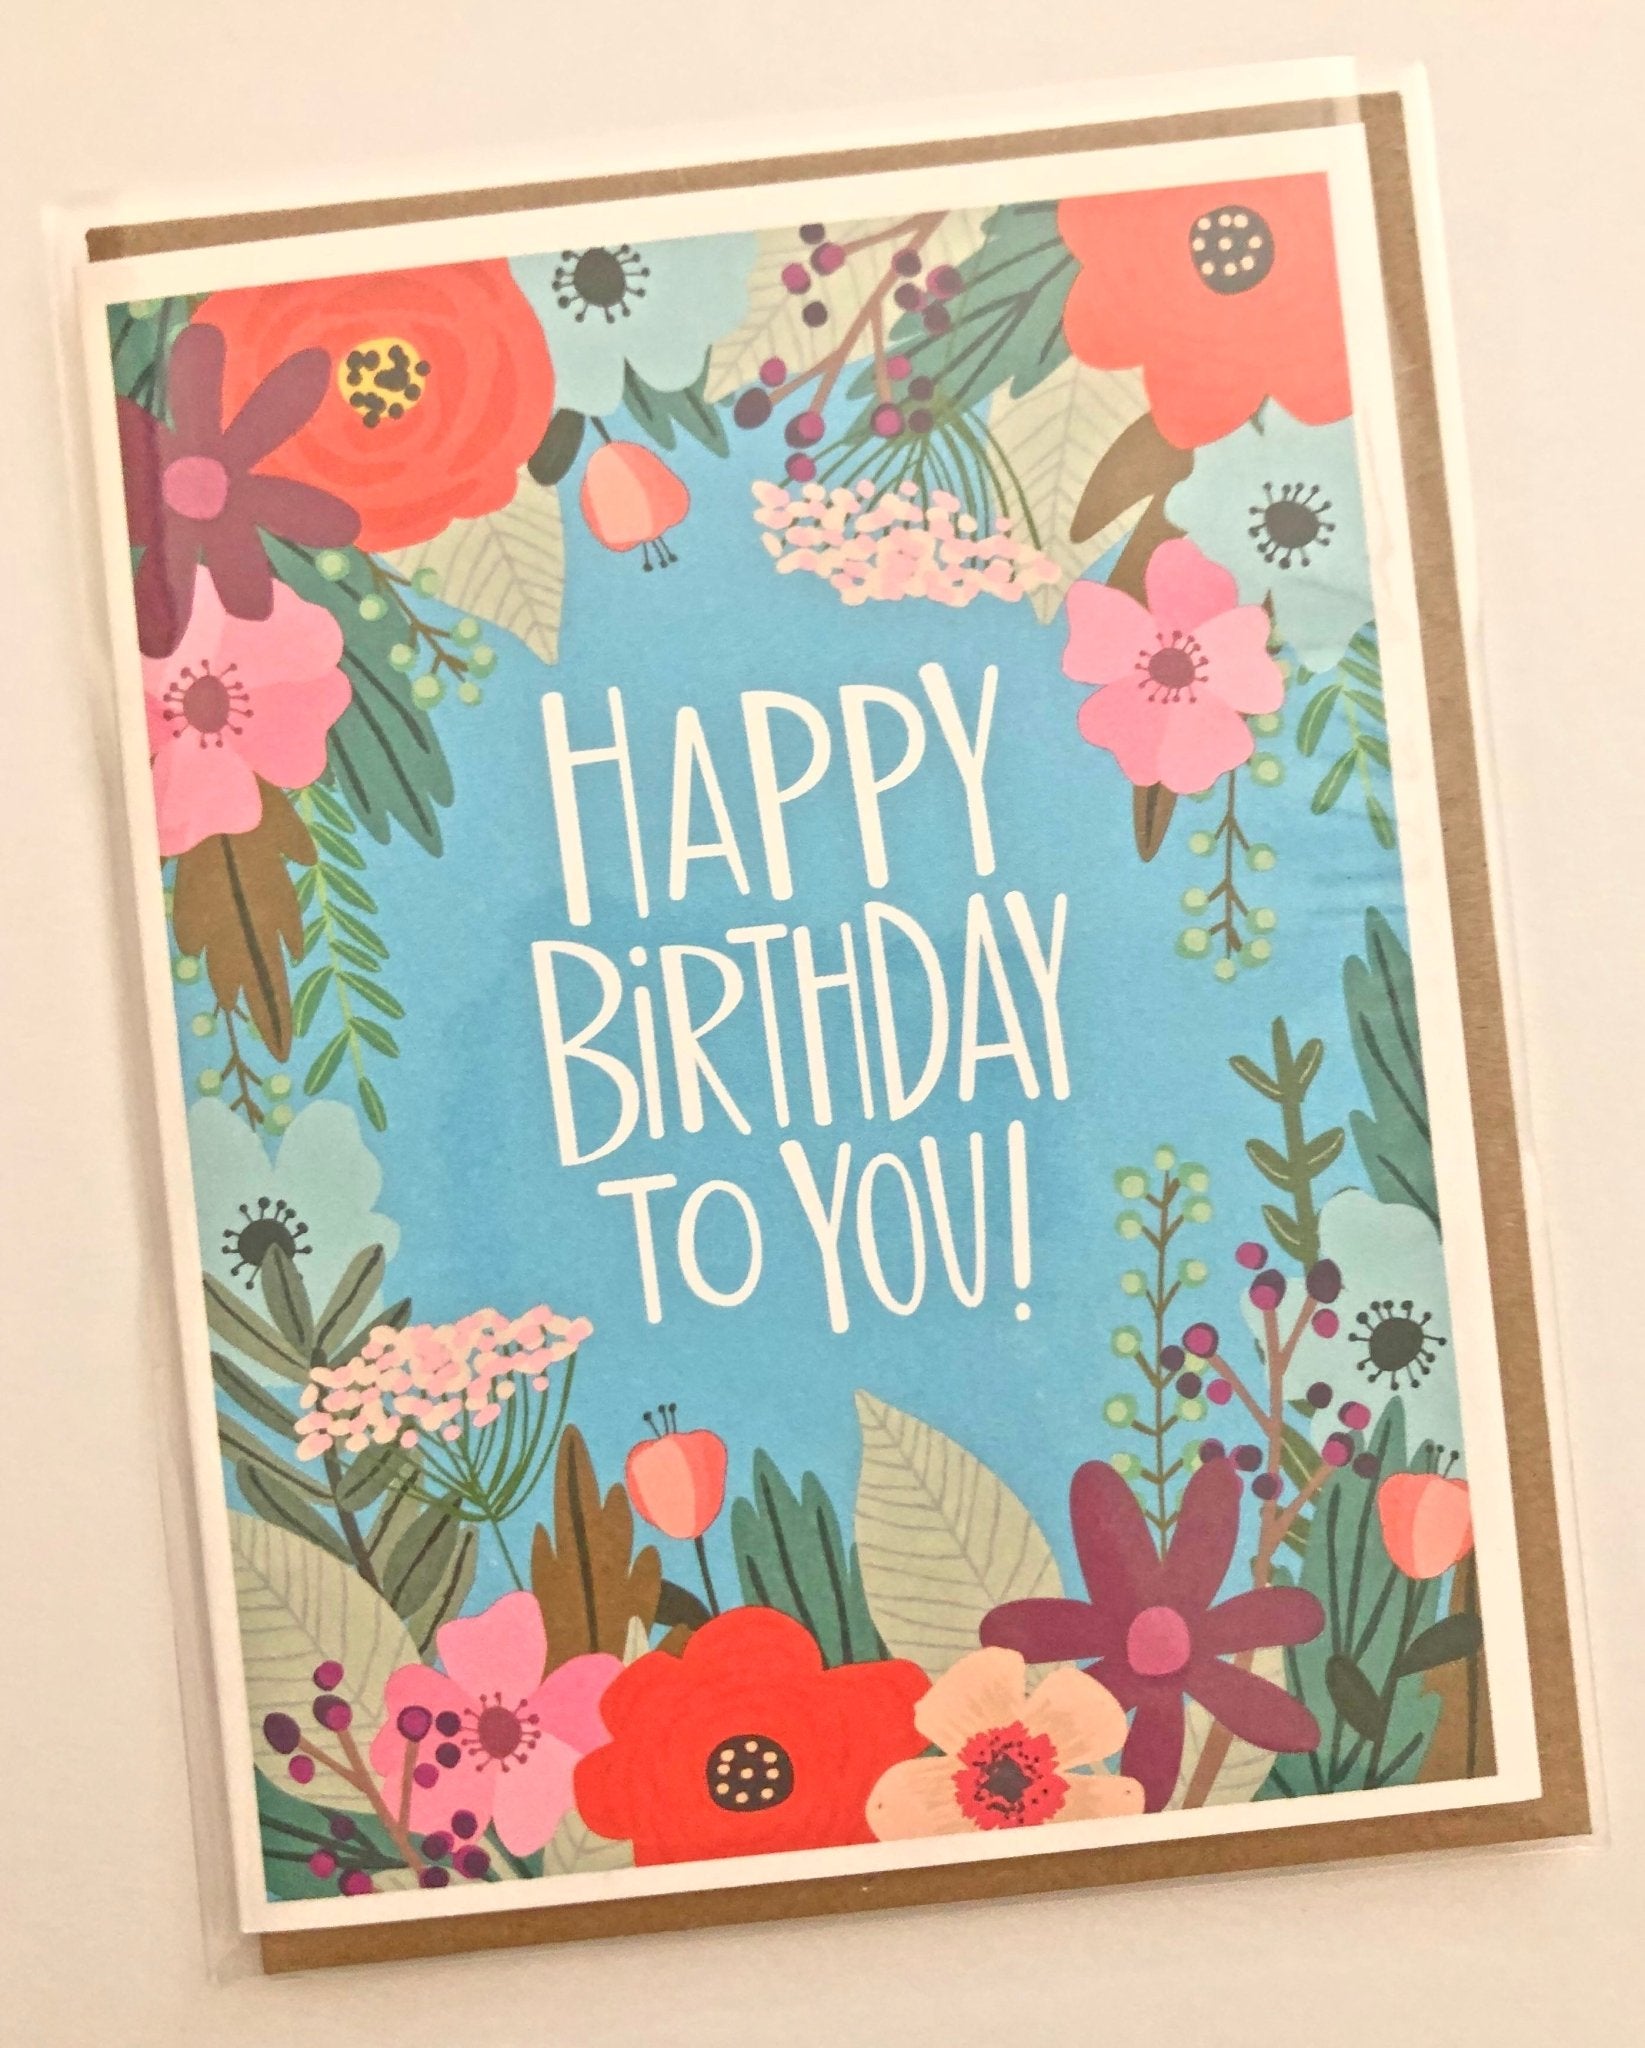 Floral Happy Birthday Card Printed on Recycled Paper - The Kindness Cause